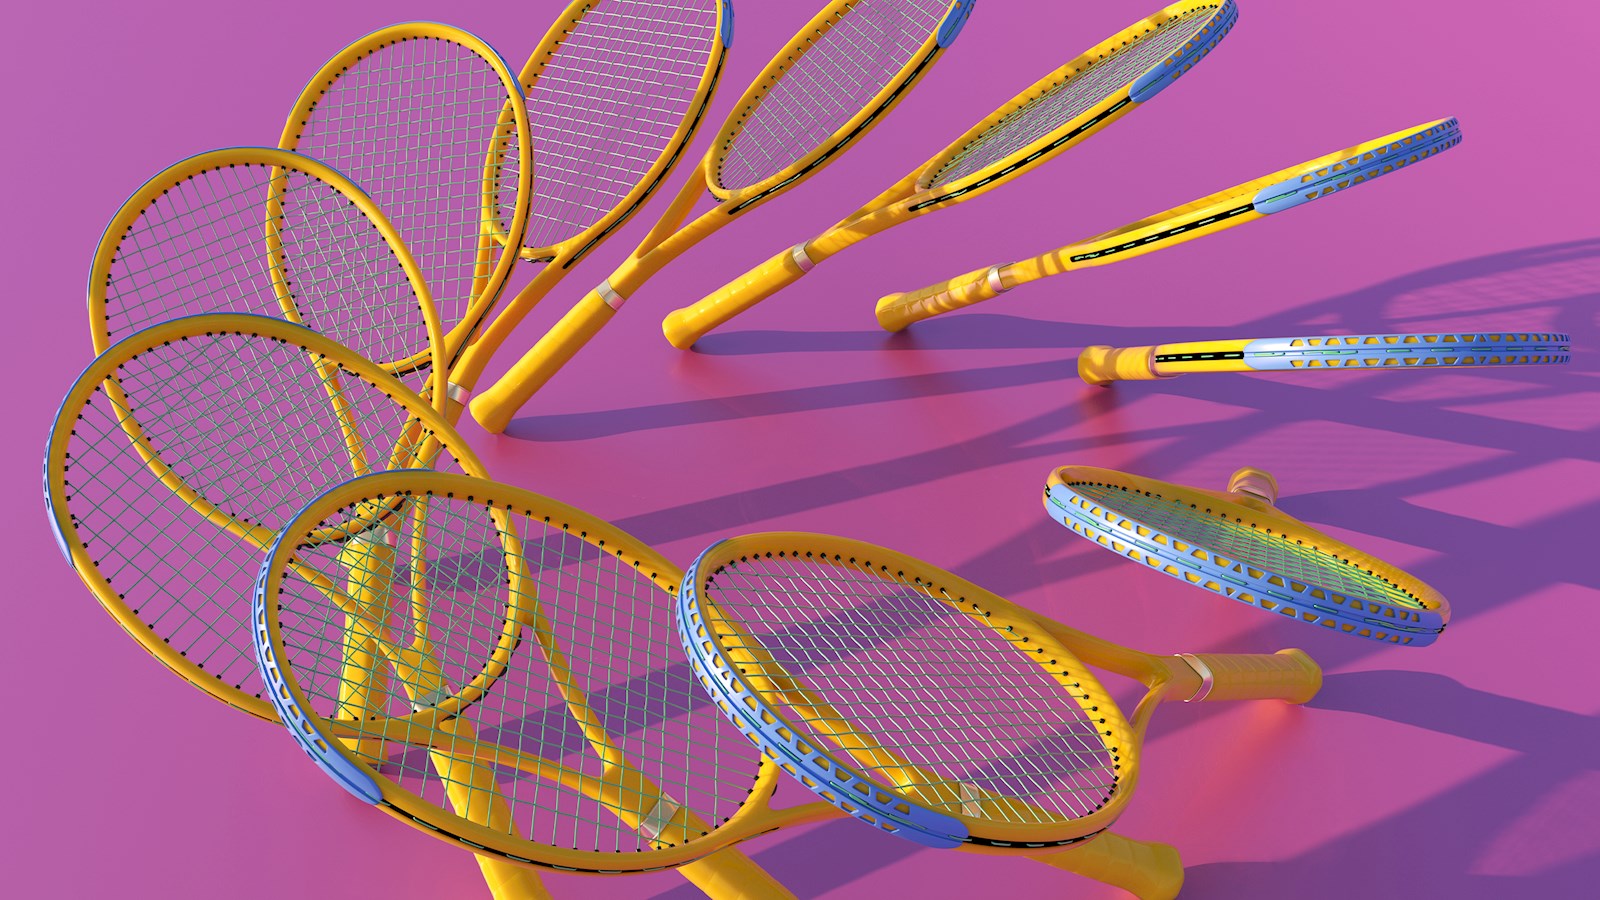 Clones of yellow tennis rackets forming circle on pink background 